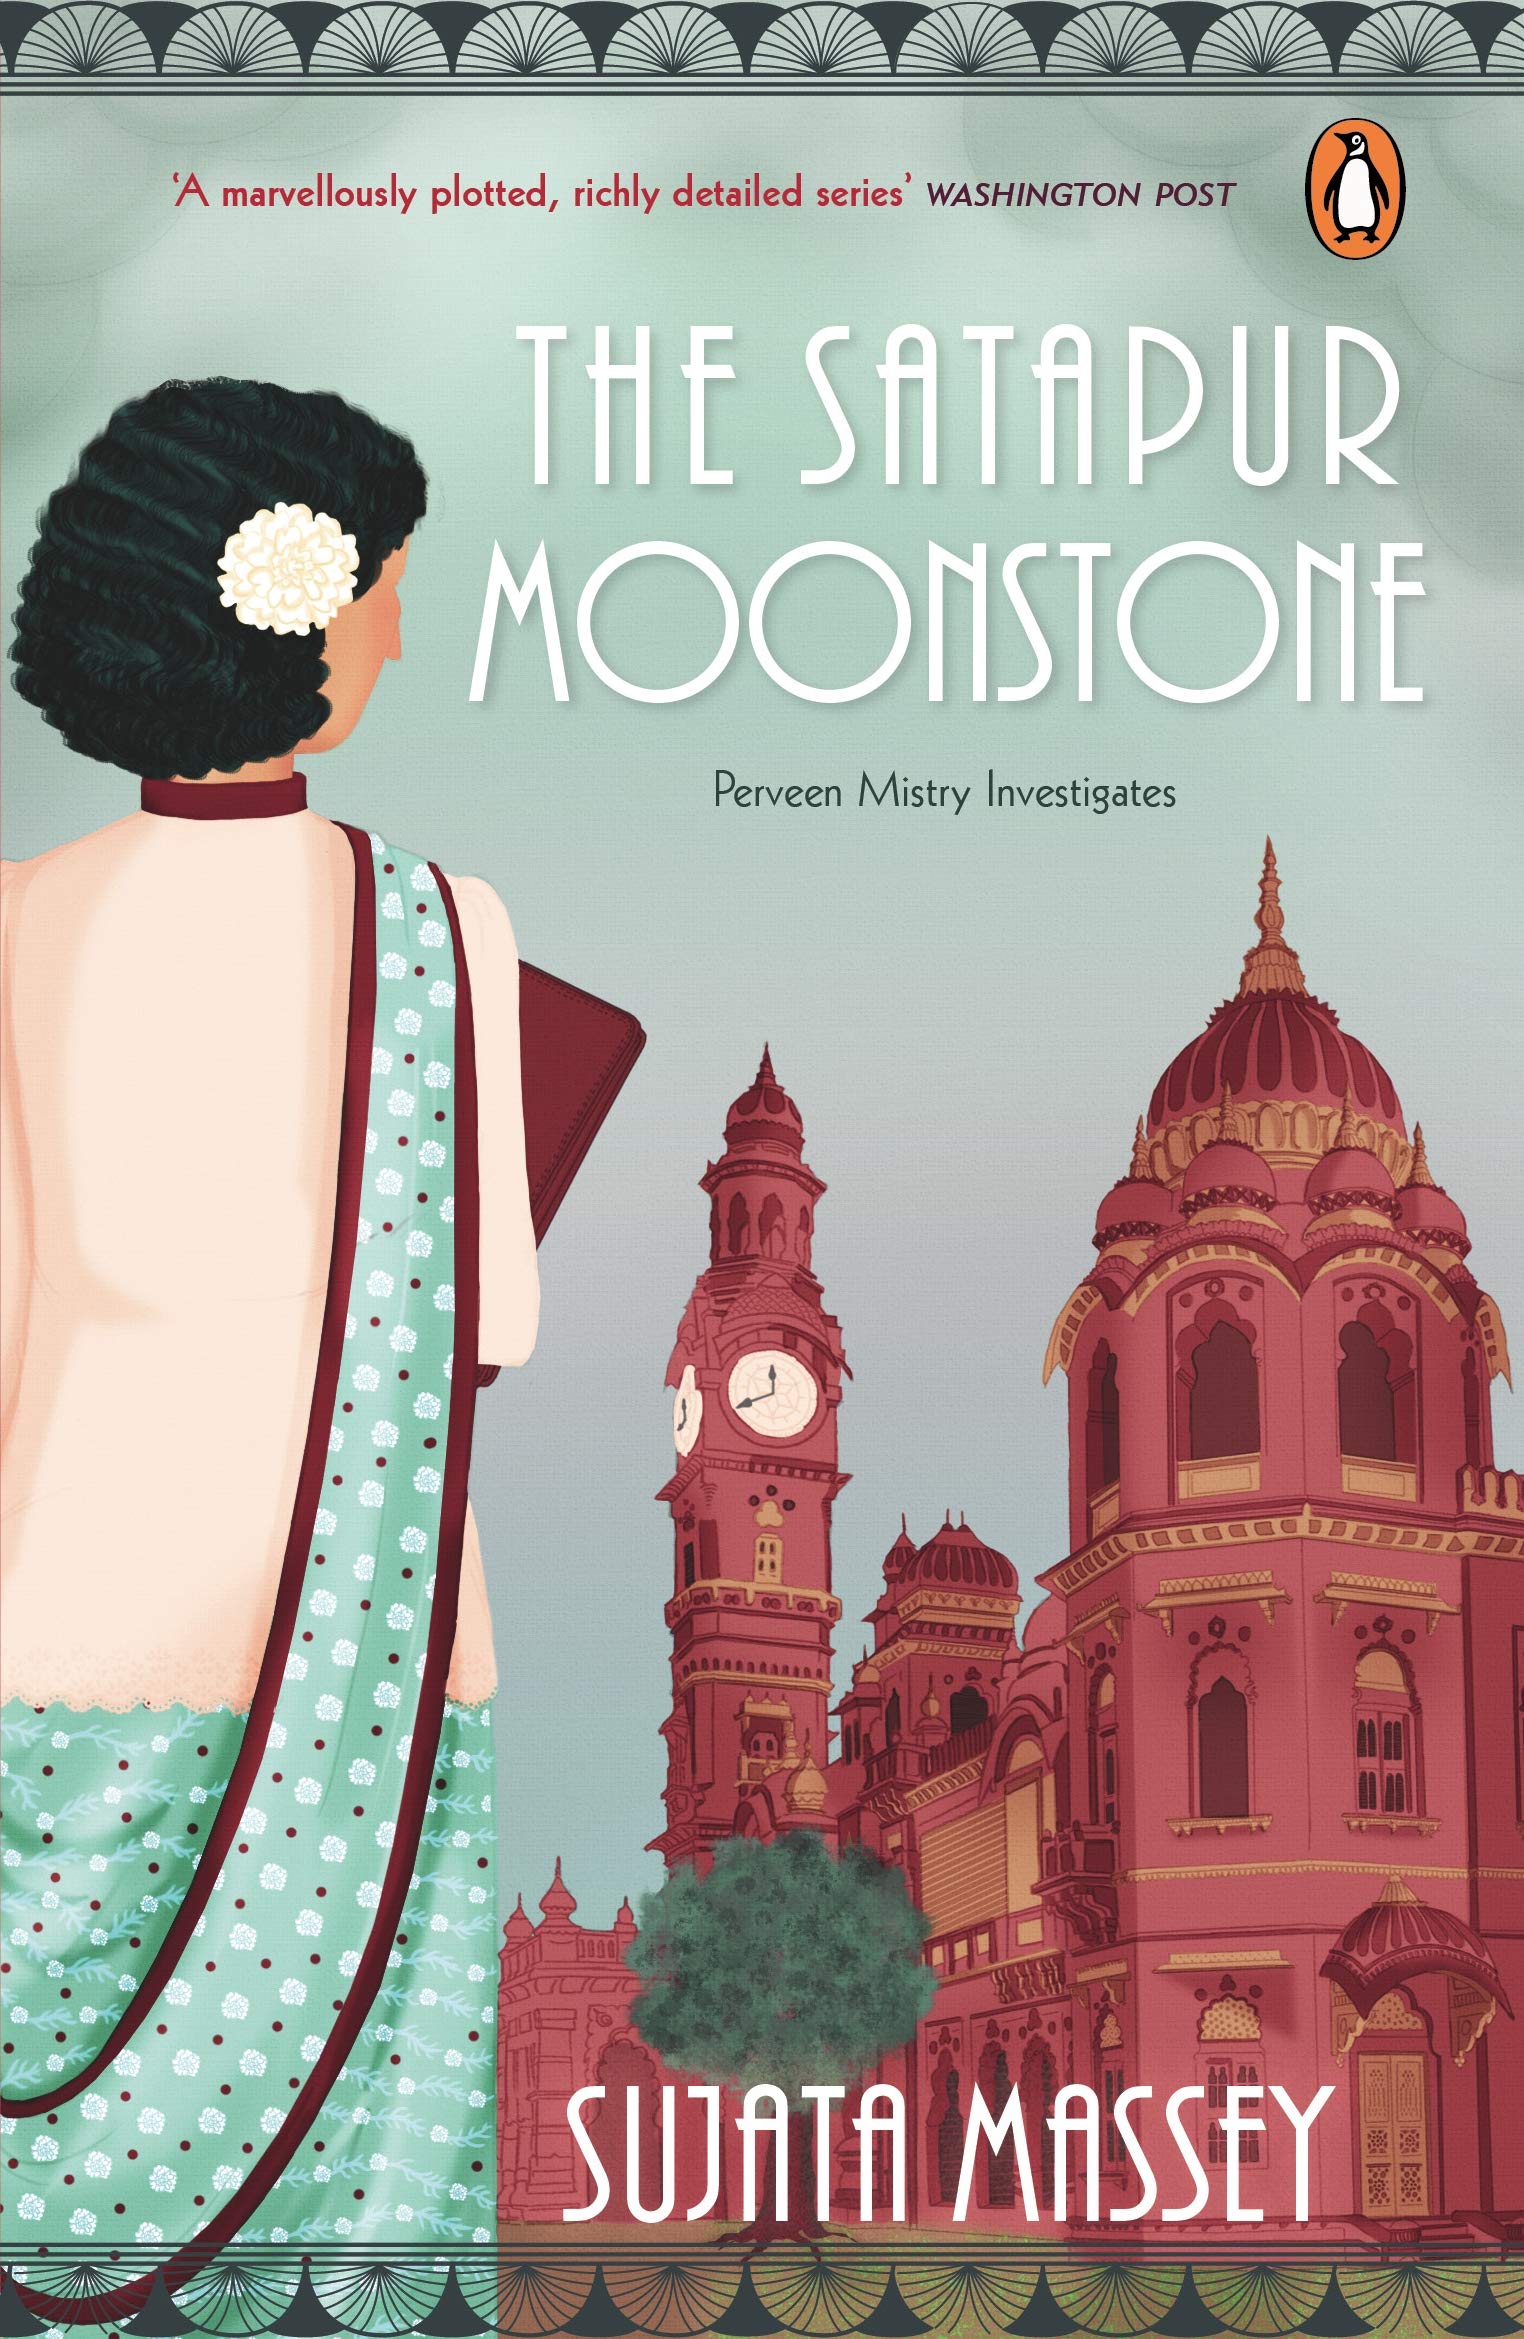 In this novel, Perveen Mistry, the only female lawyer in 1920s Bombay, investigates a case of palace intrigue